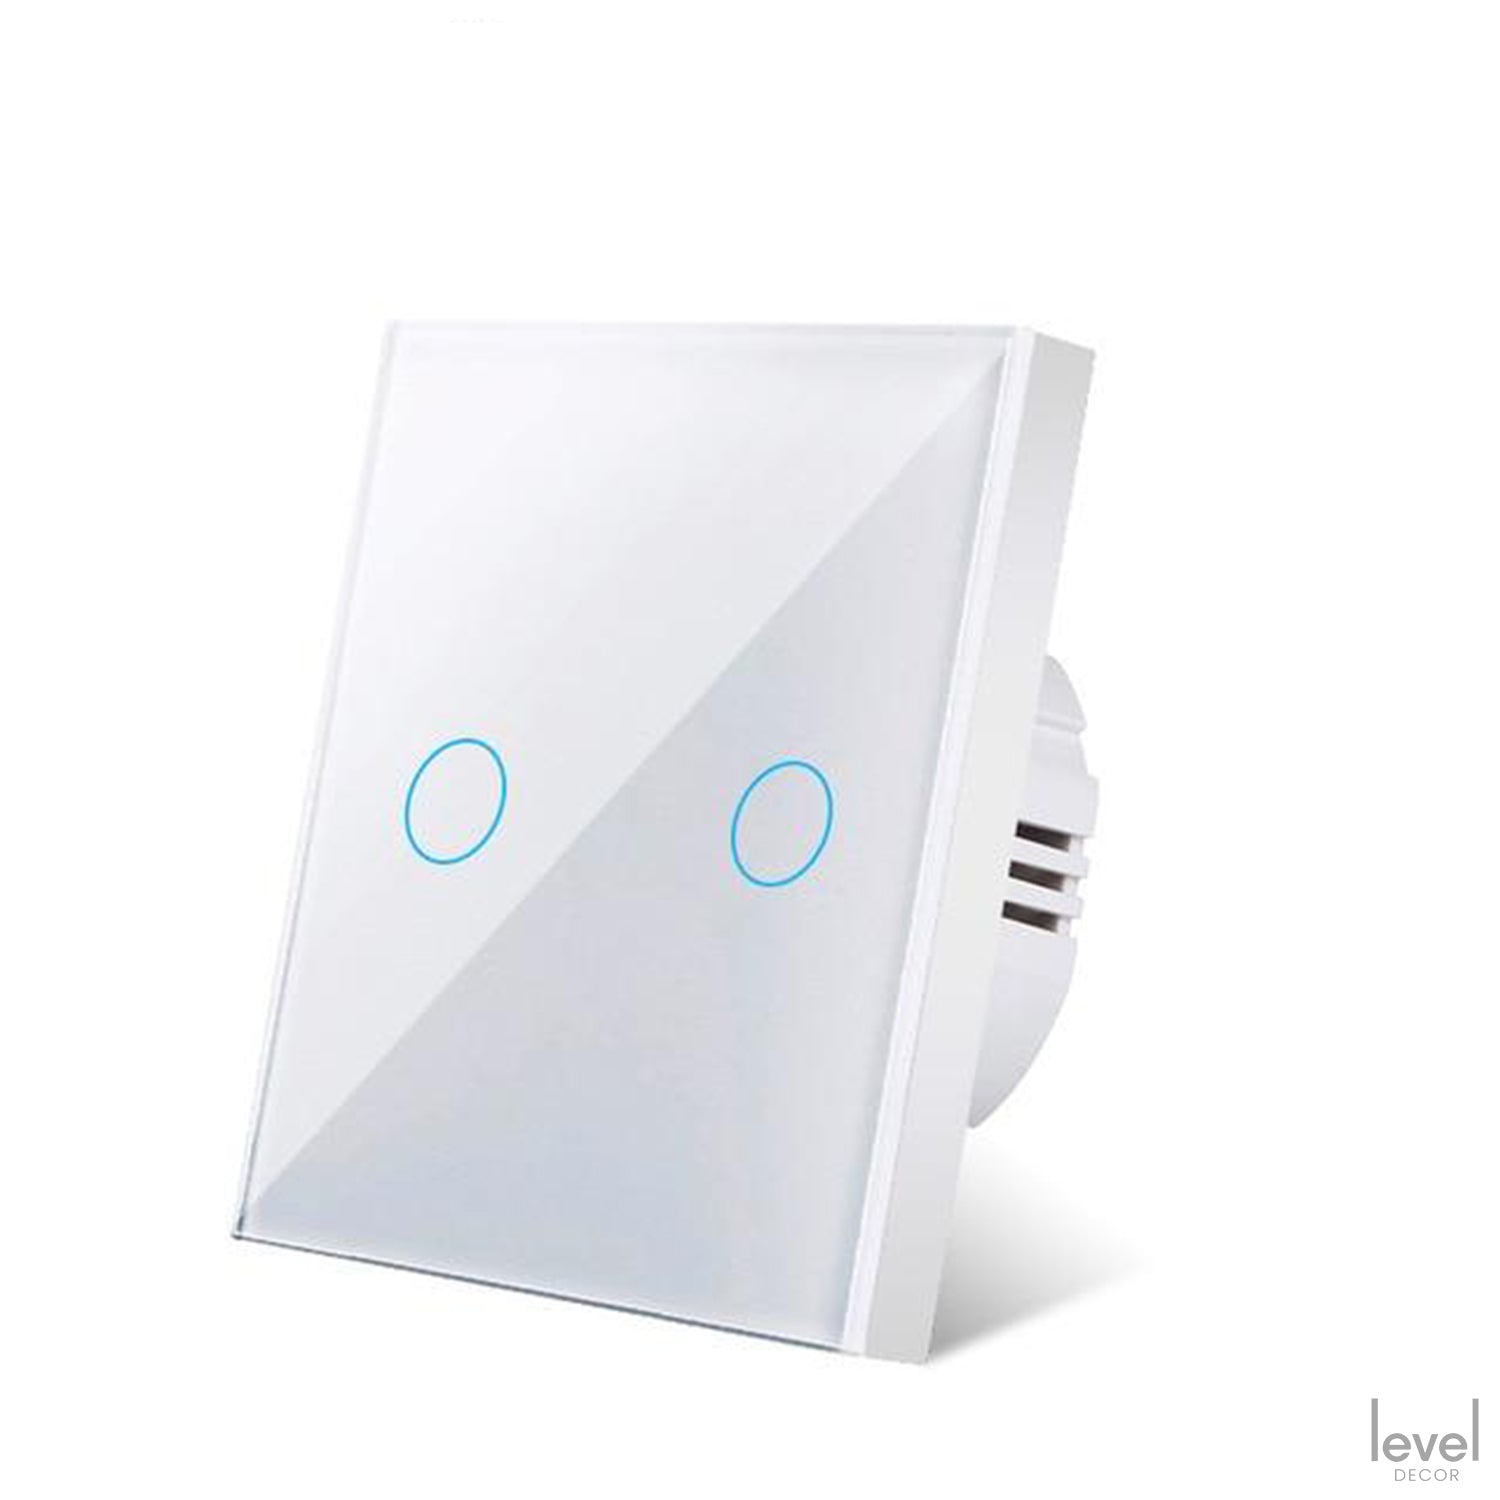 LED 2 Gang Crystal Tempered Glass Wall Light Touch Switch - White/White 2 Gang - Level Decor